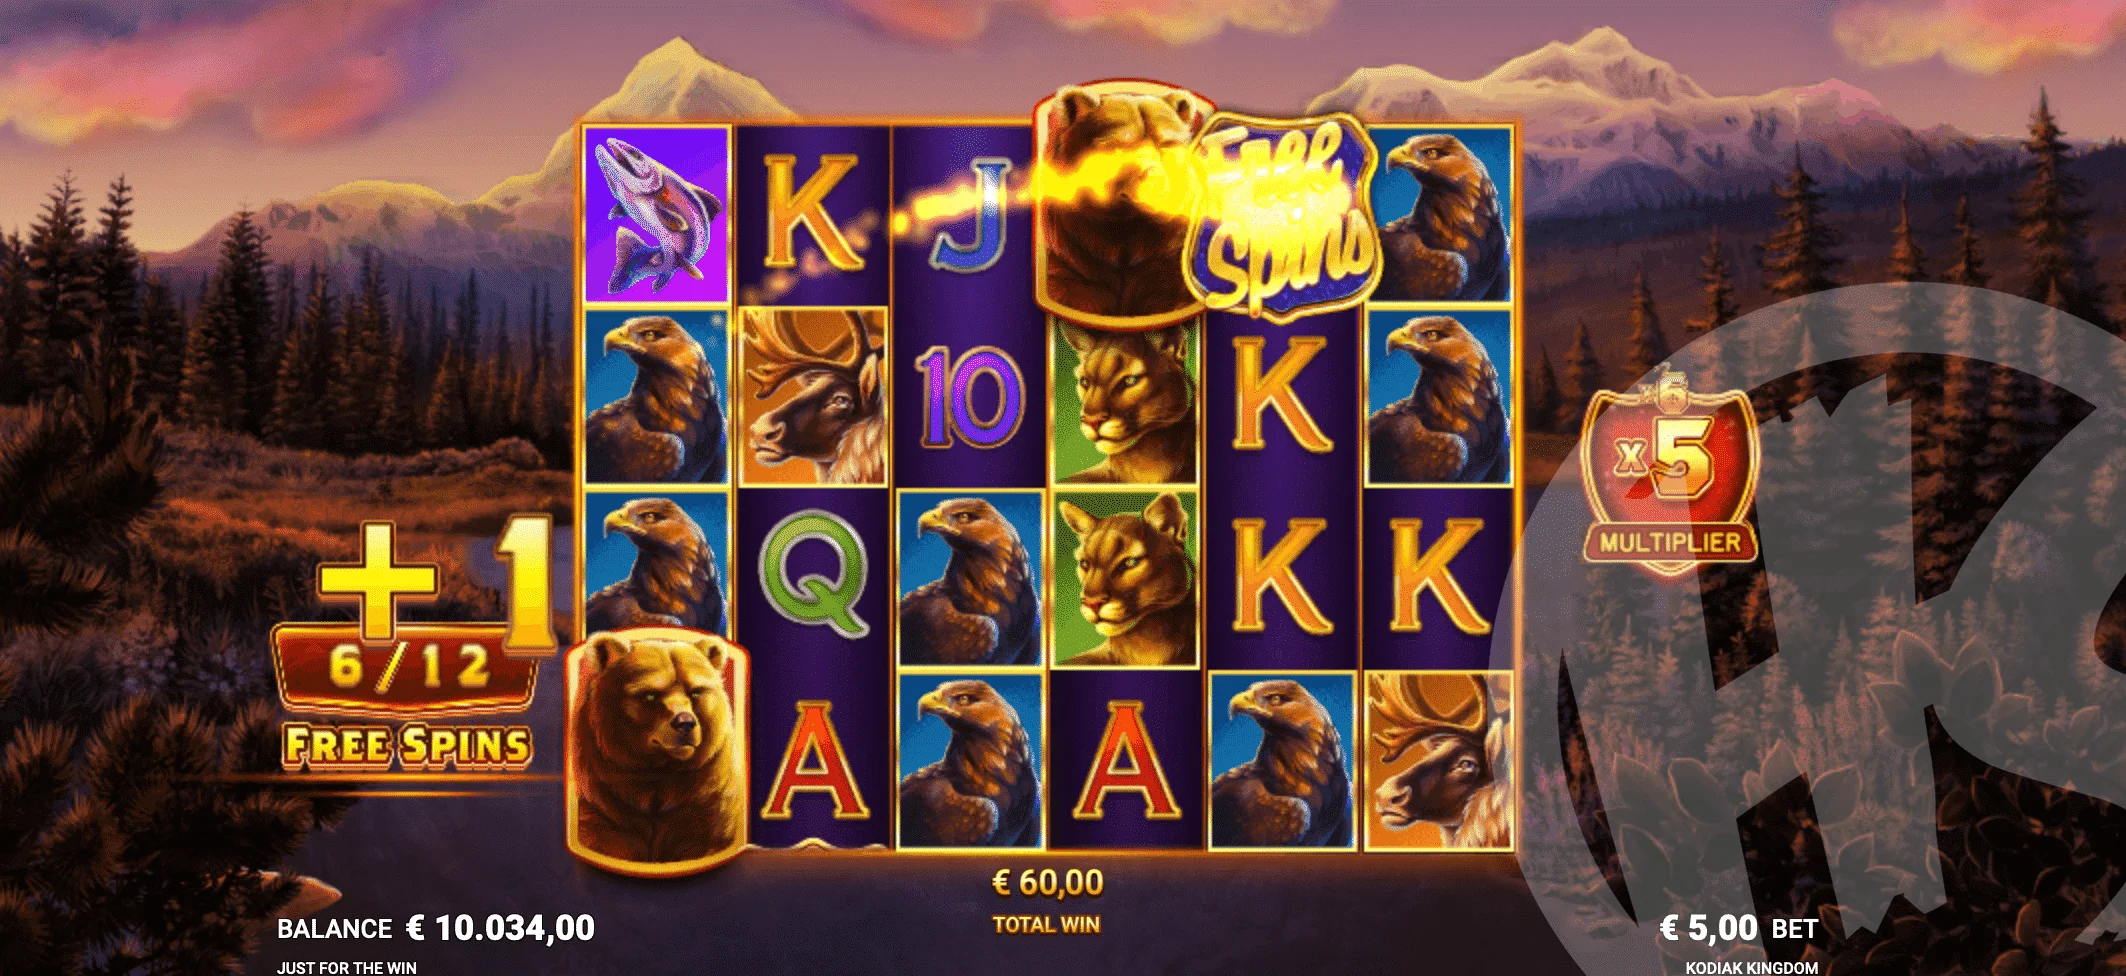 Landing Scatters During Free Spins Trigger Additional Free Spins